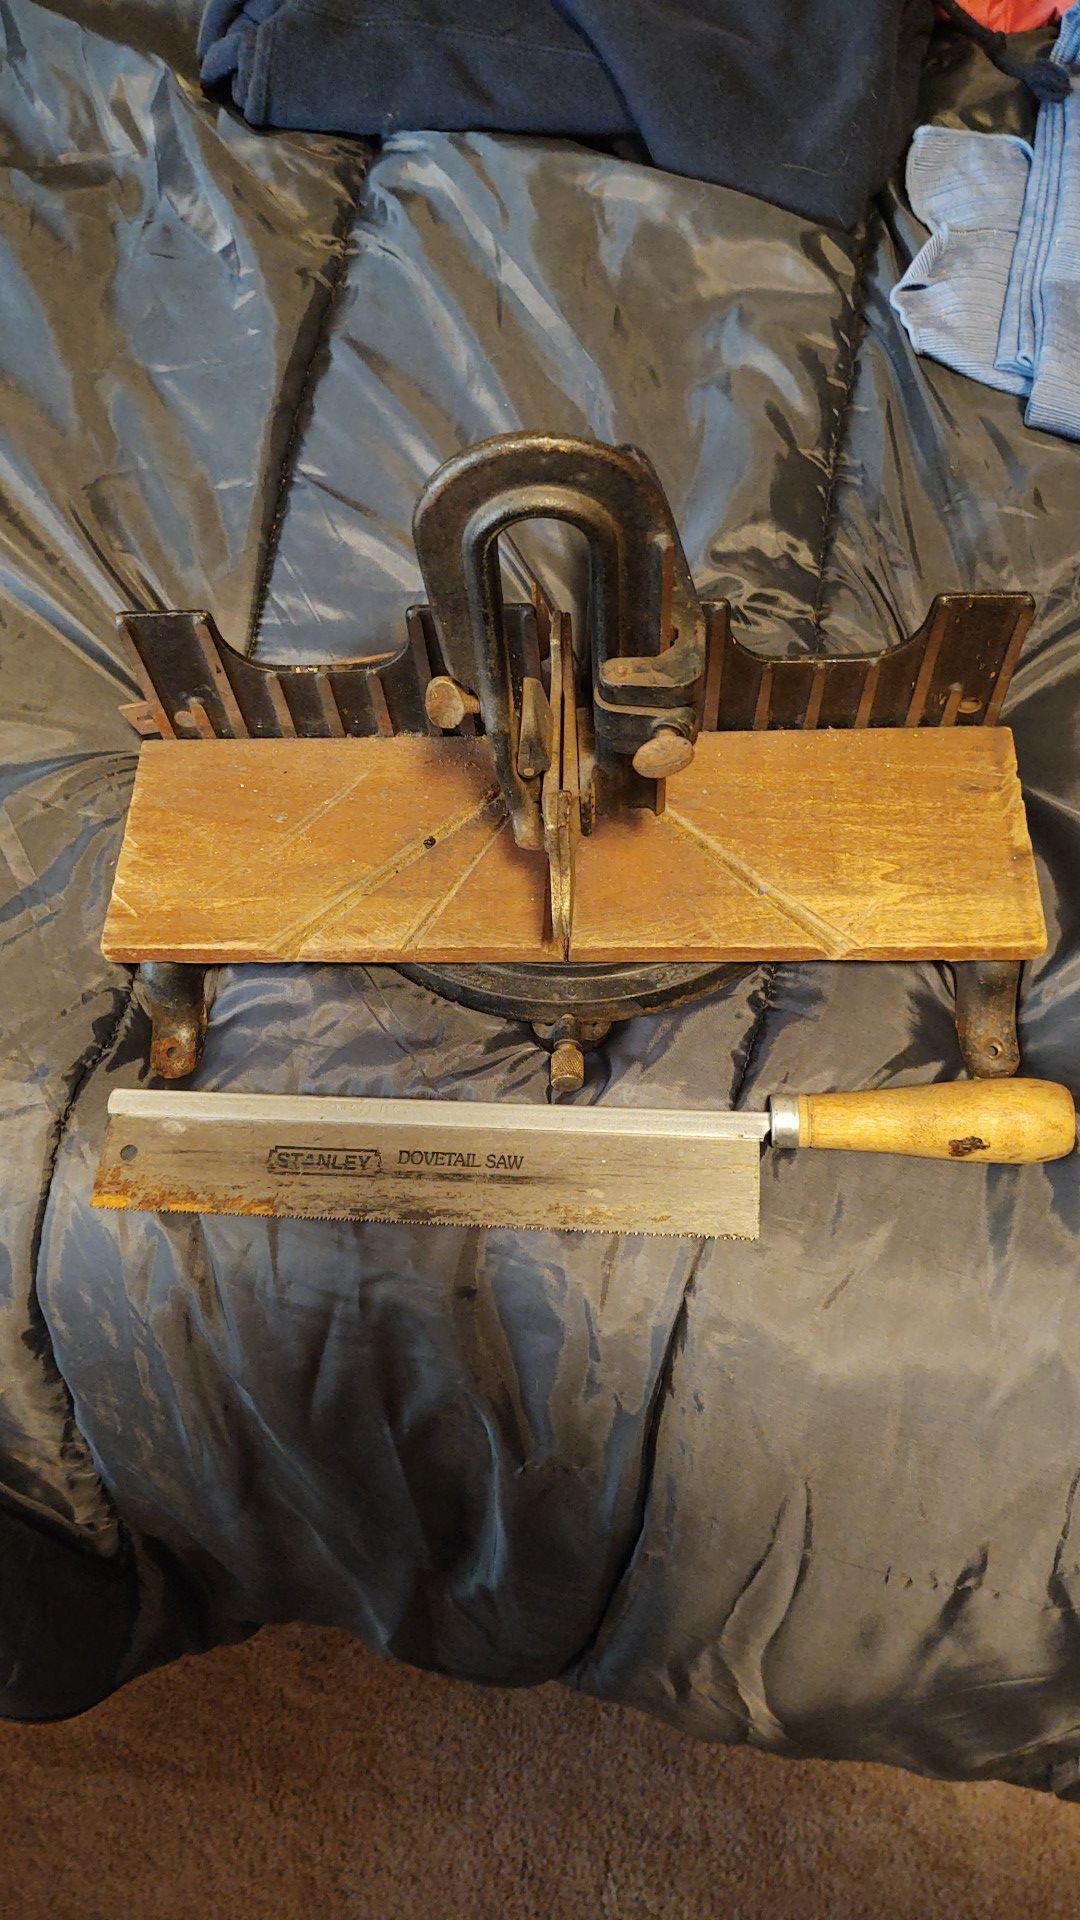 Antique saw holder and Dovetail saw.